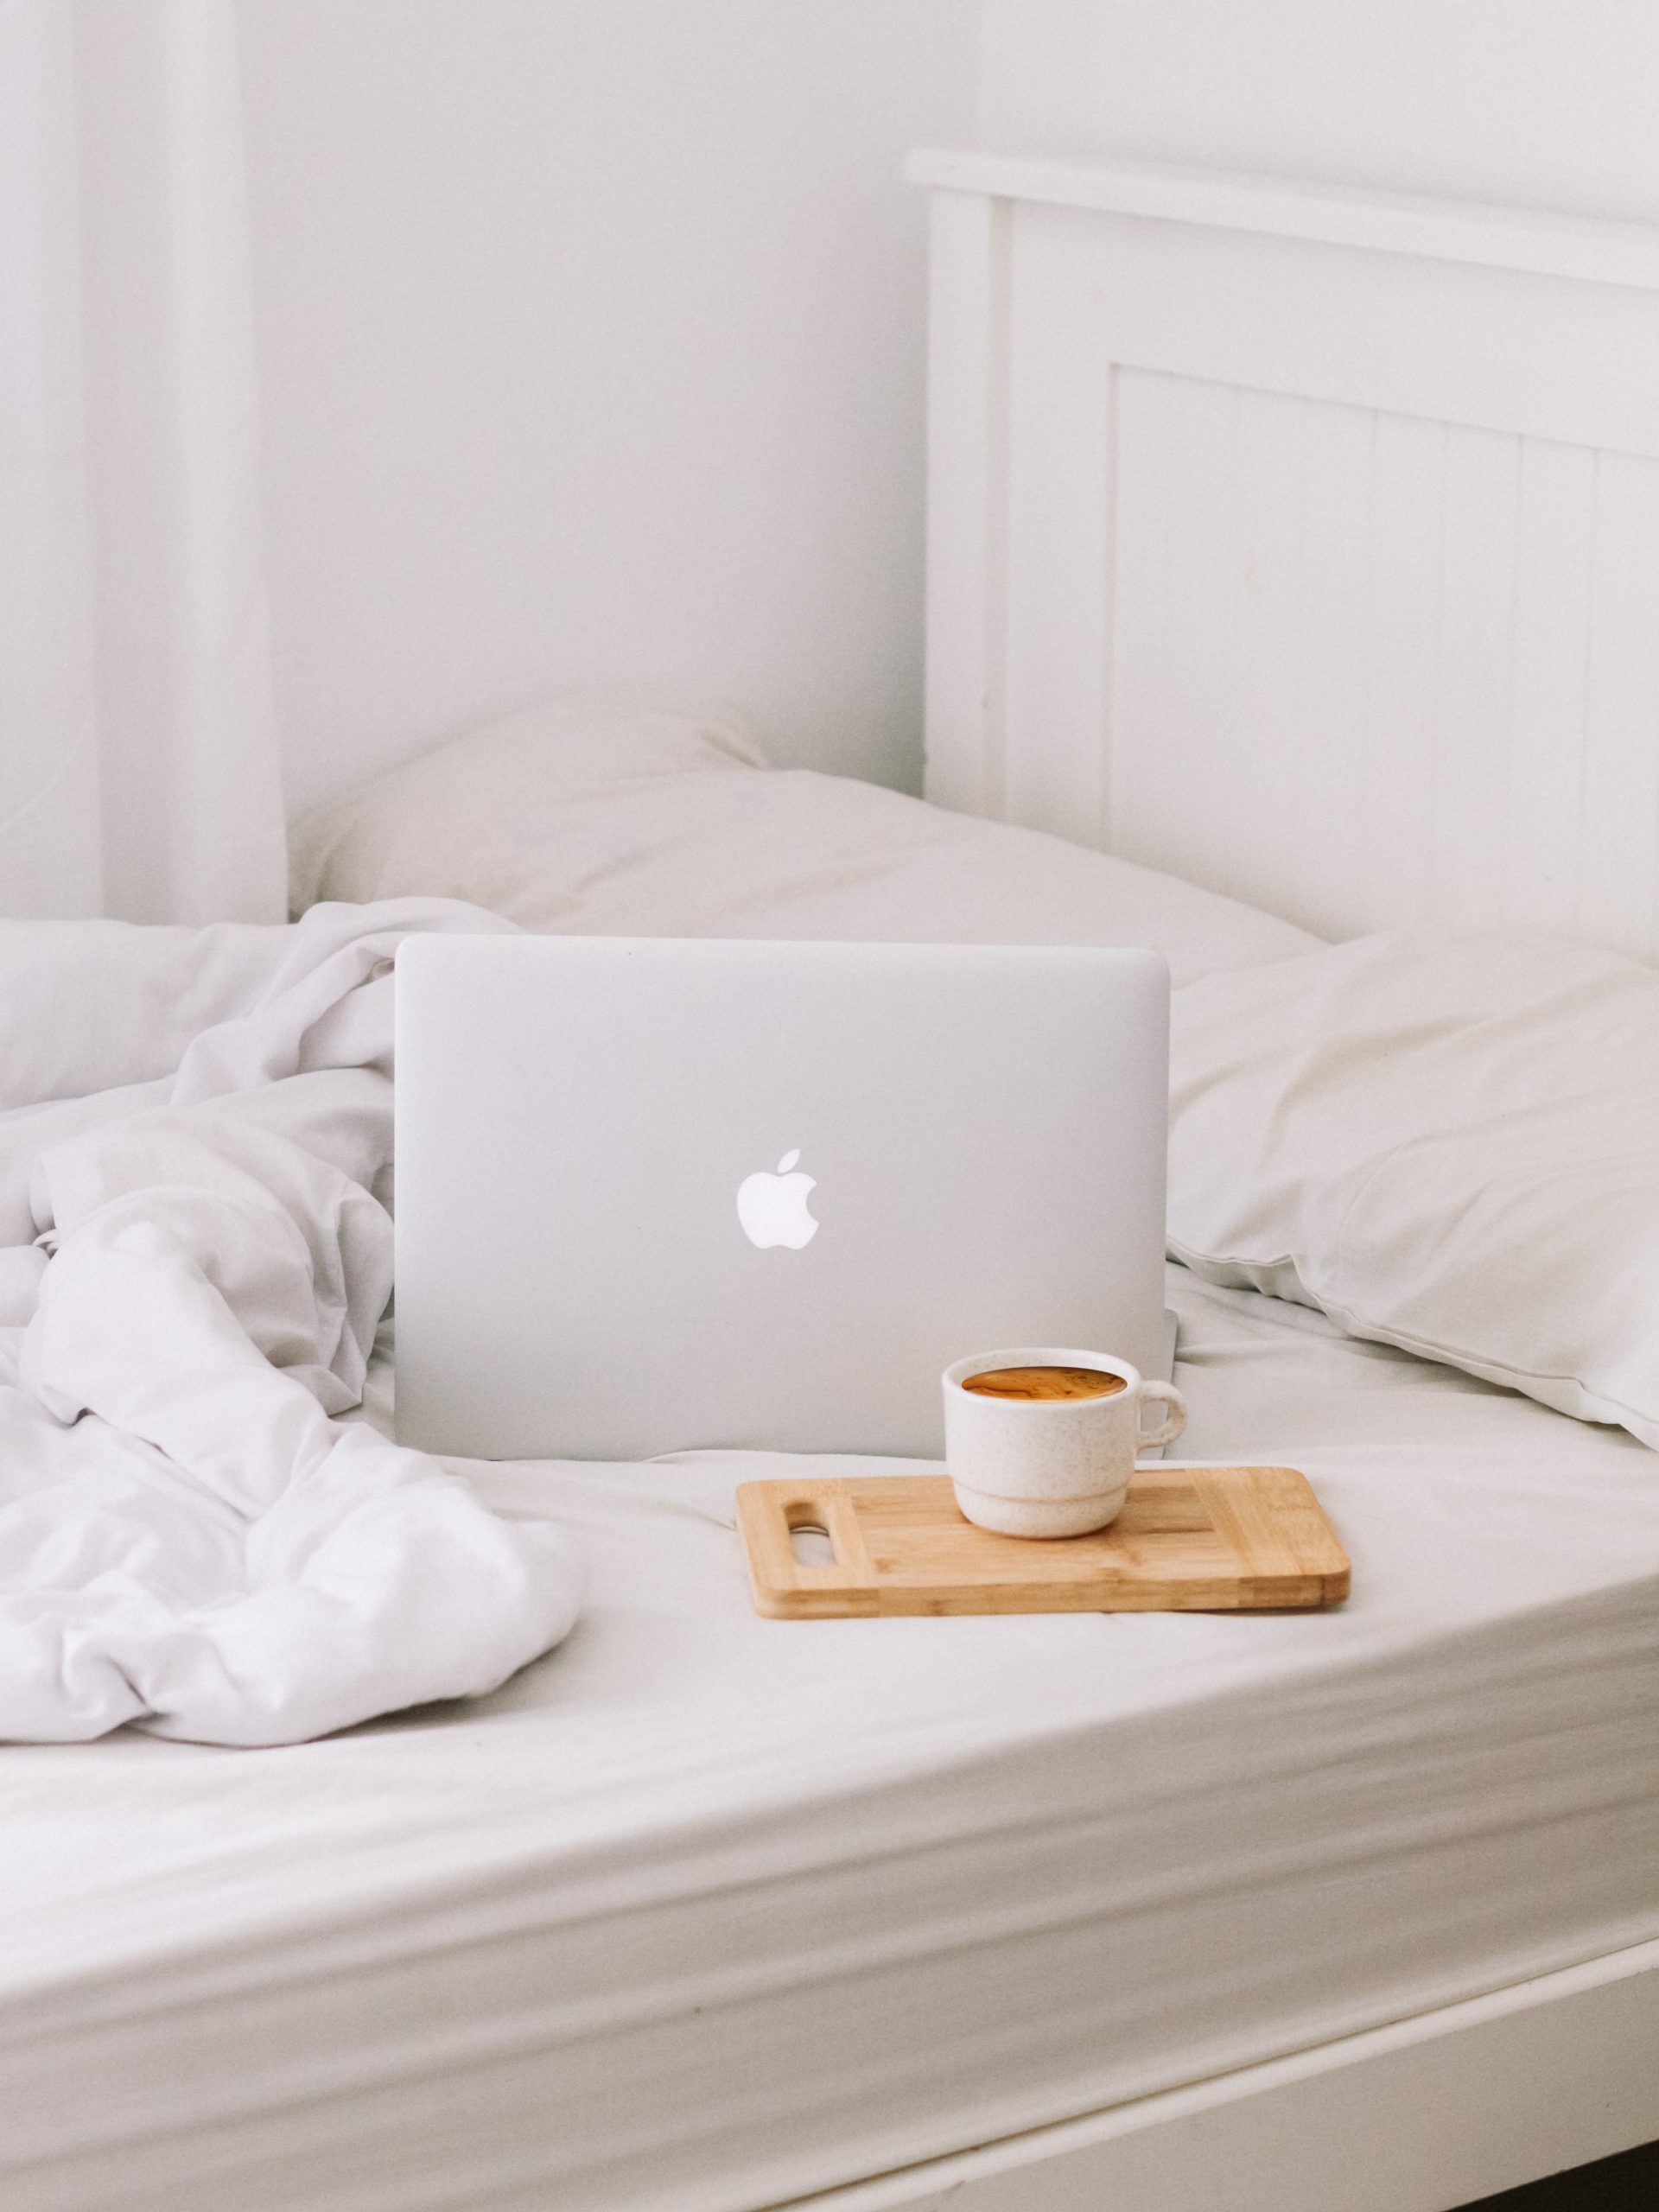 macbook laptop on bed with coffee mug